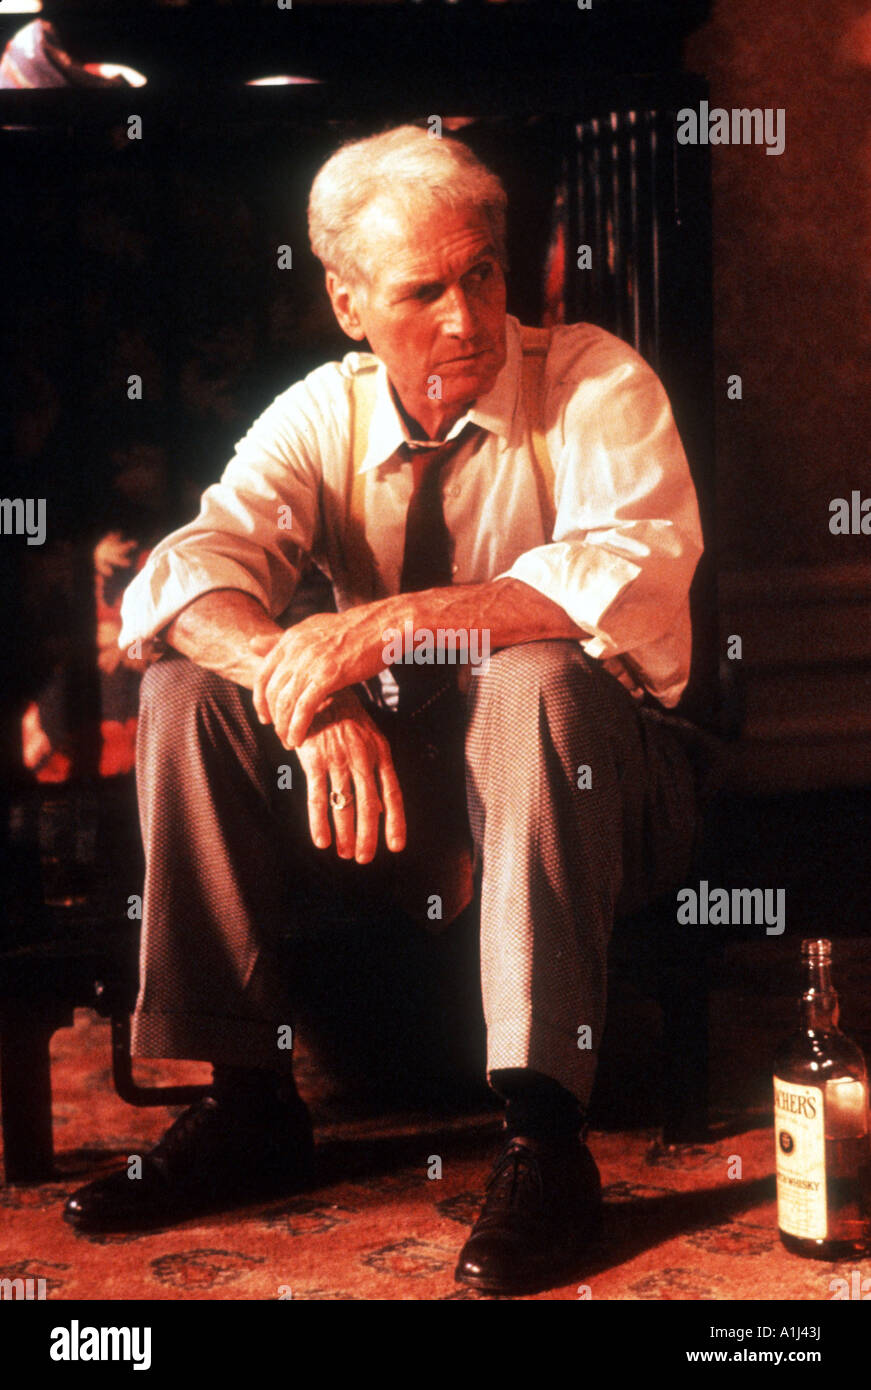 Blaze Year 1989 Director Ron Shelton Paul Newman Based upon Blaze Starr and Huey Perry s book Stock Photo